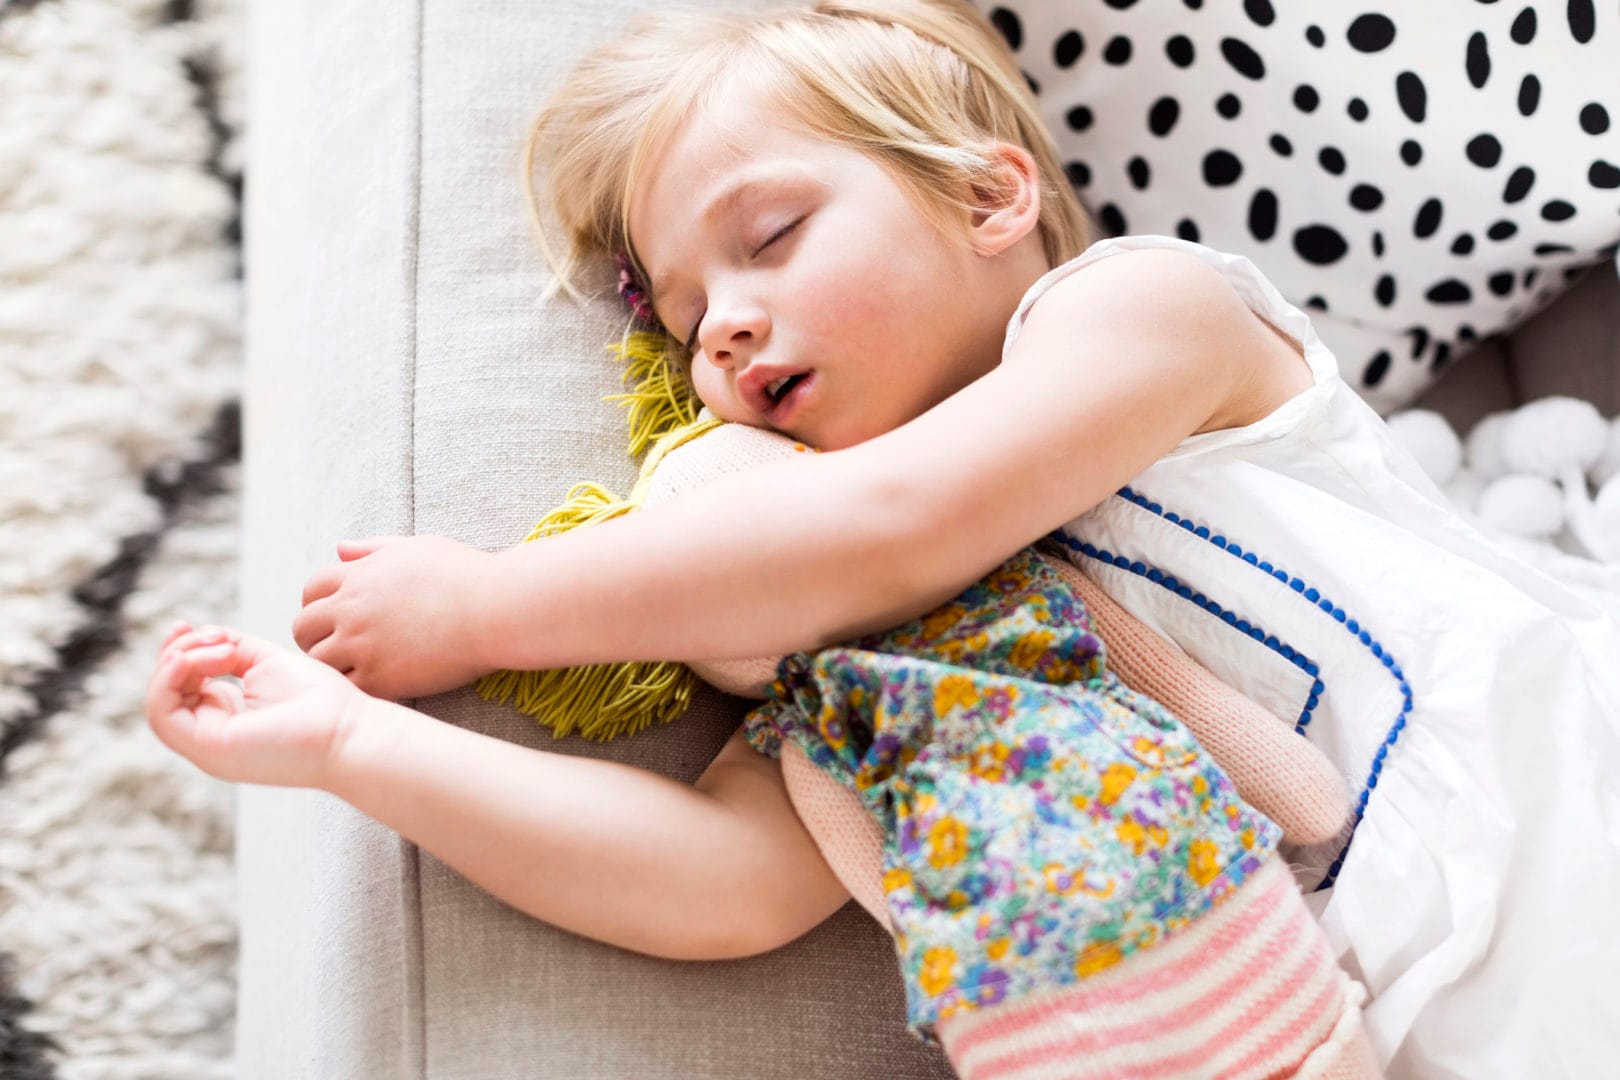 7 proven ways to get your toddlers down for a nap — without a fuss